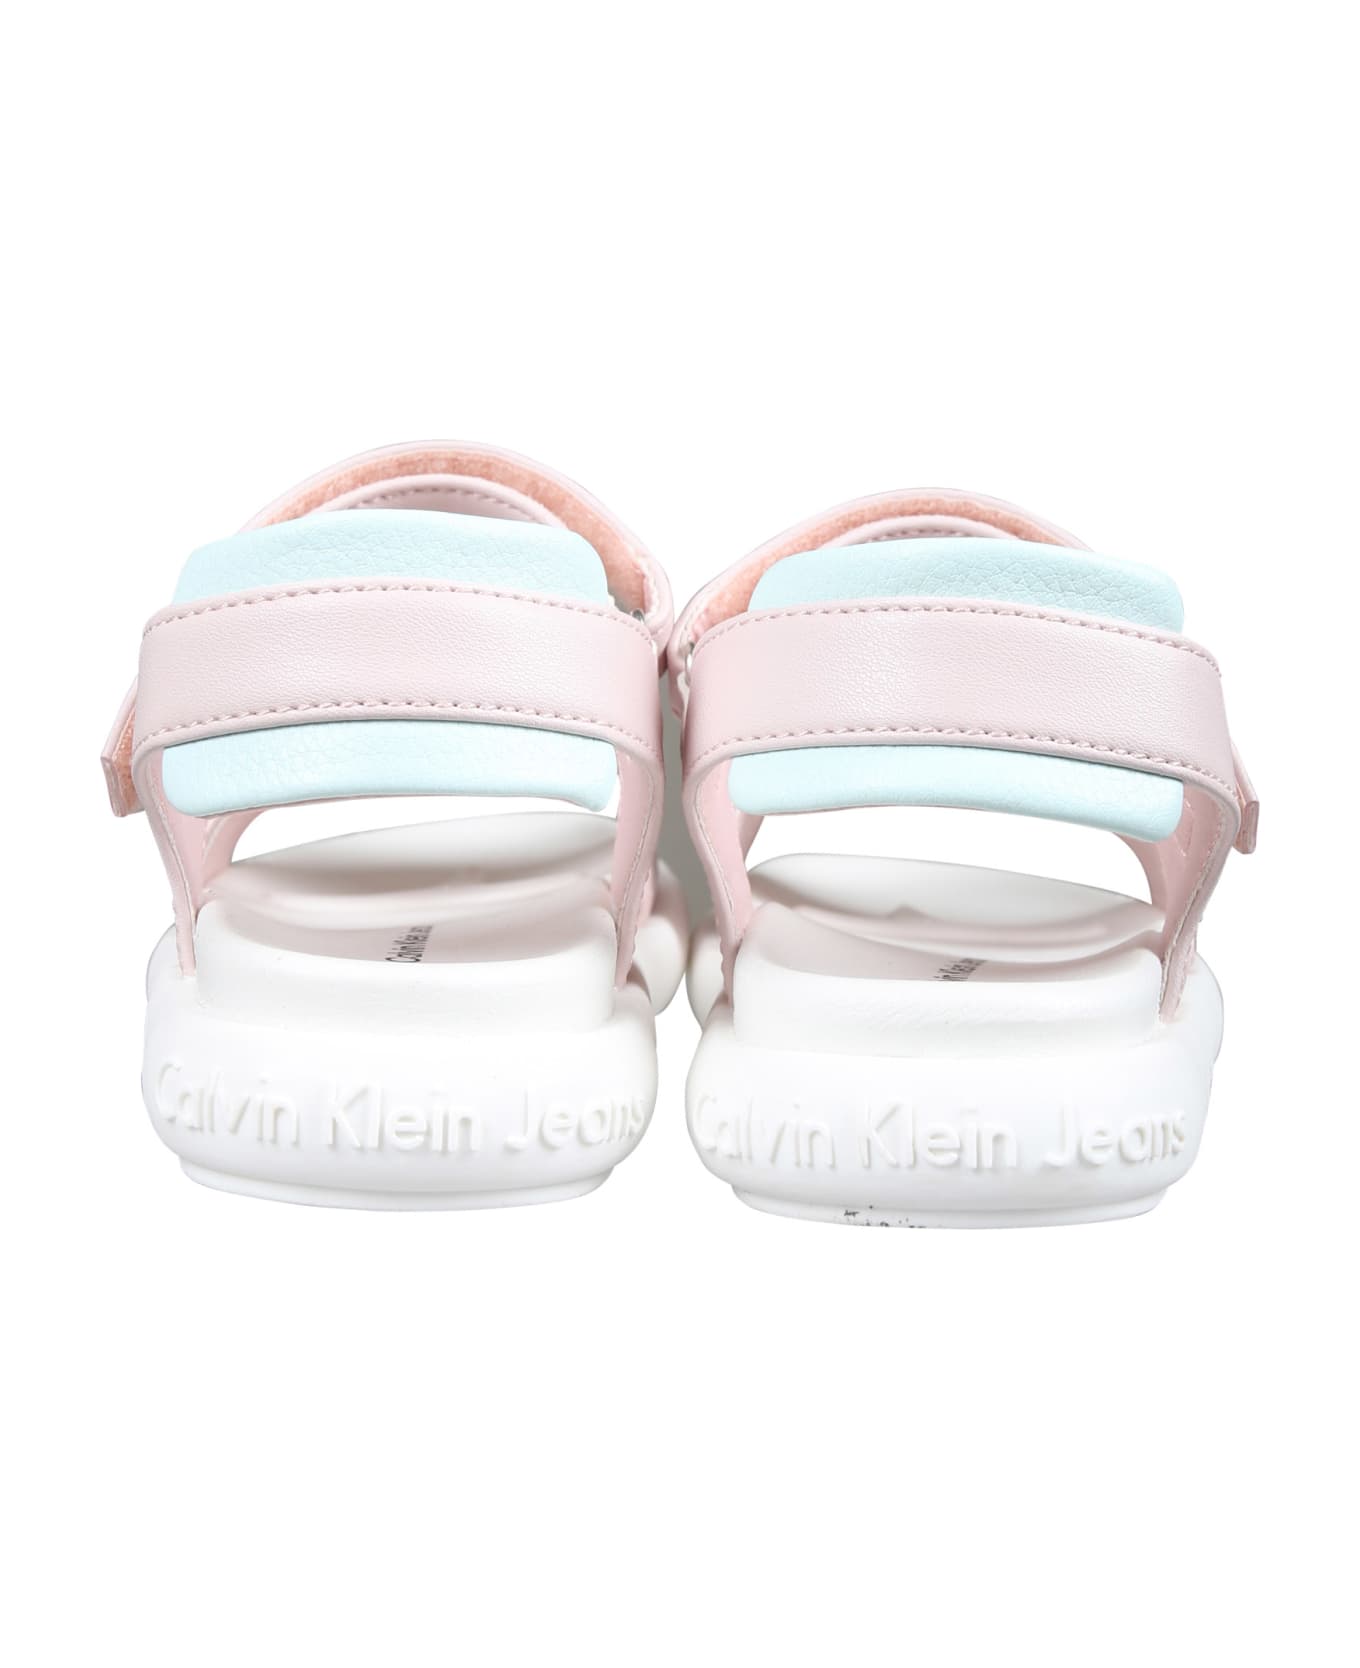 Calvin Klein Pink Sandals For Girl With Logo - Pink シューズ